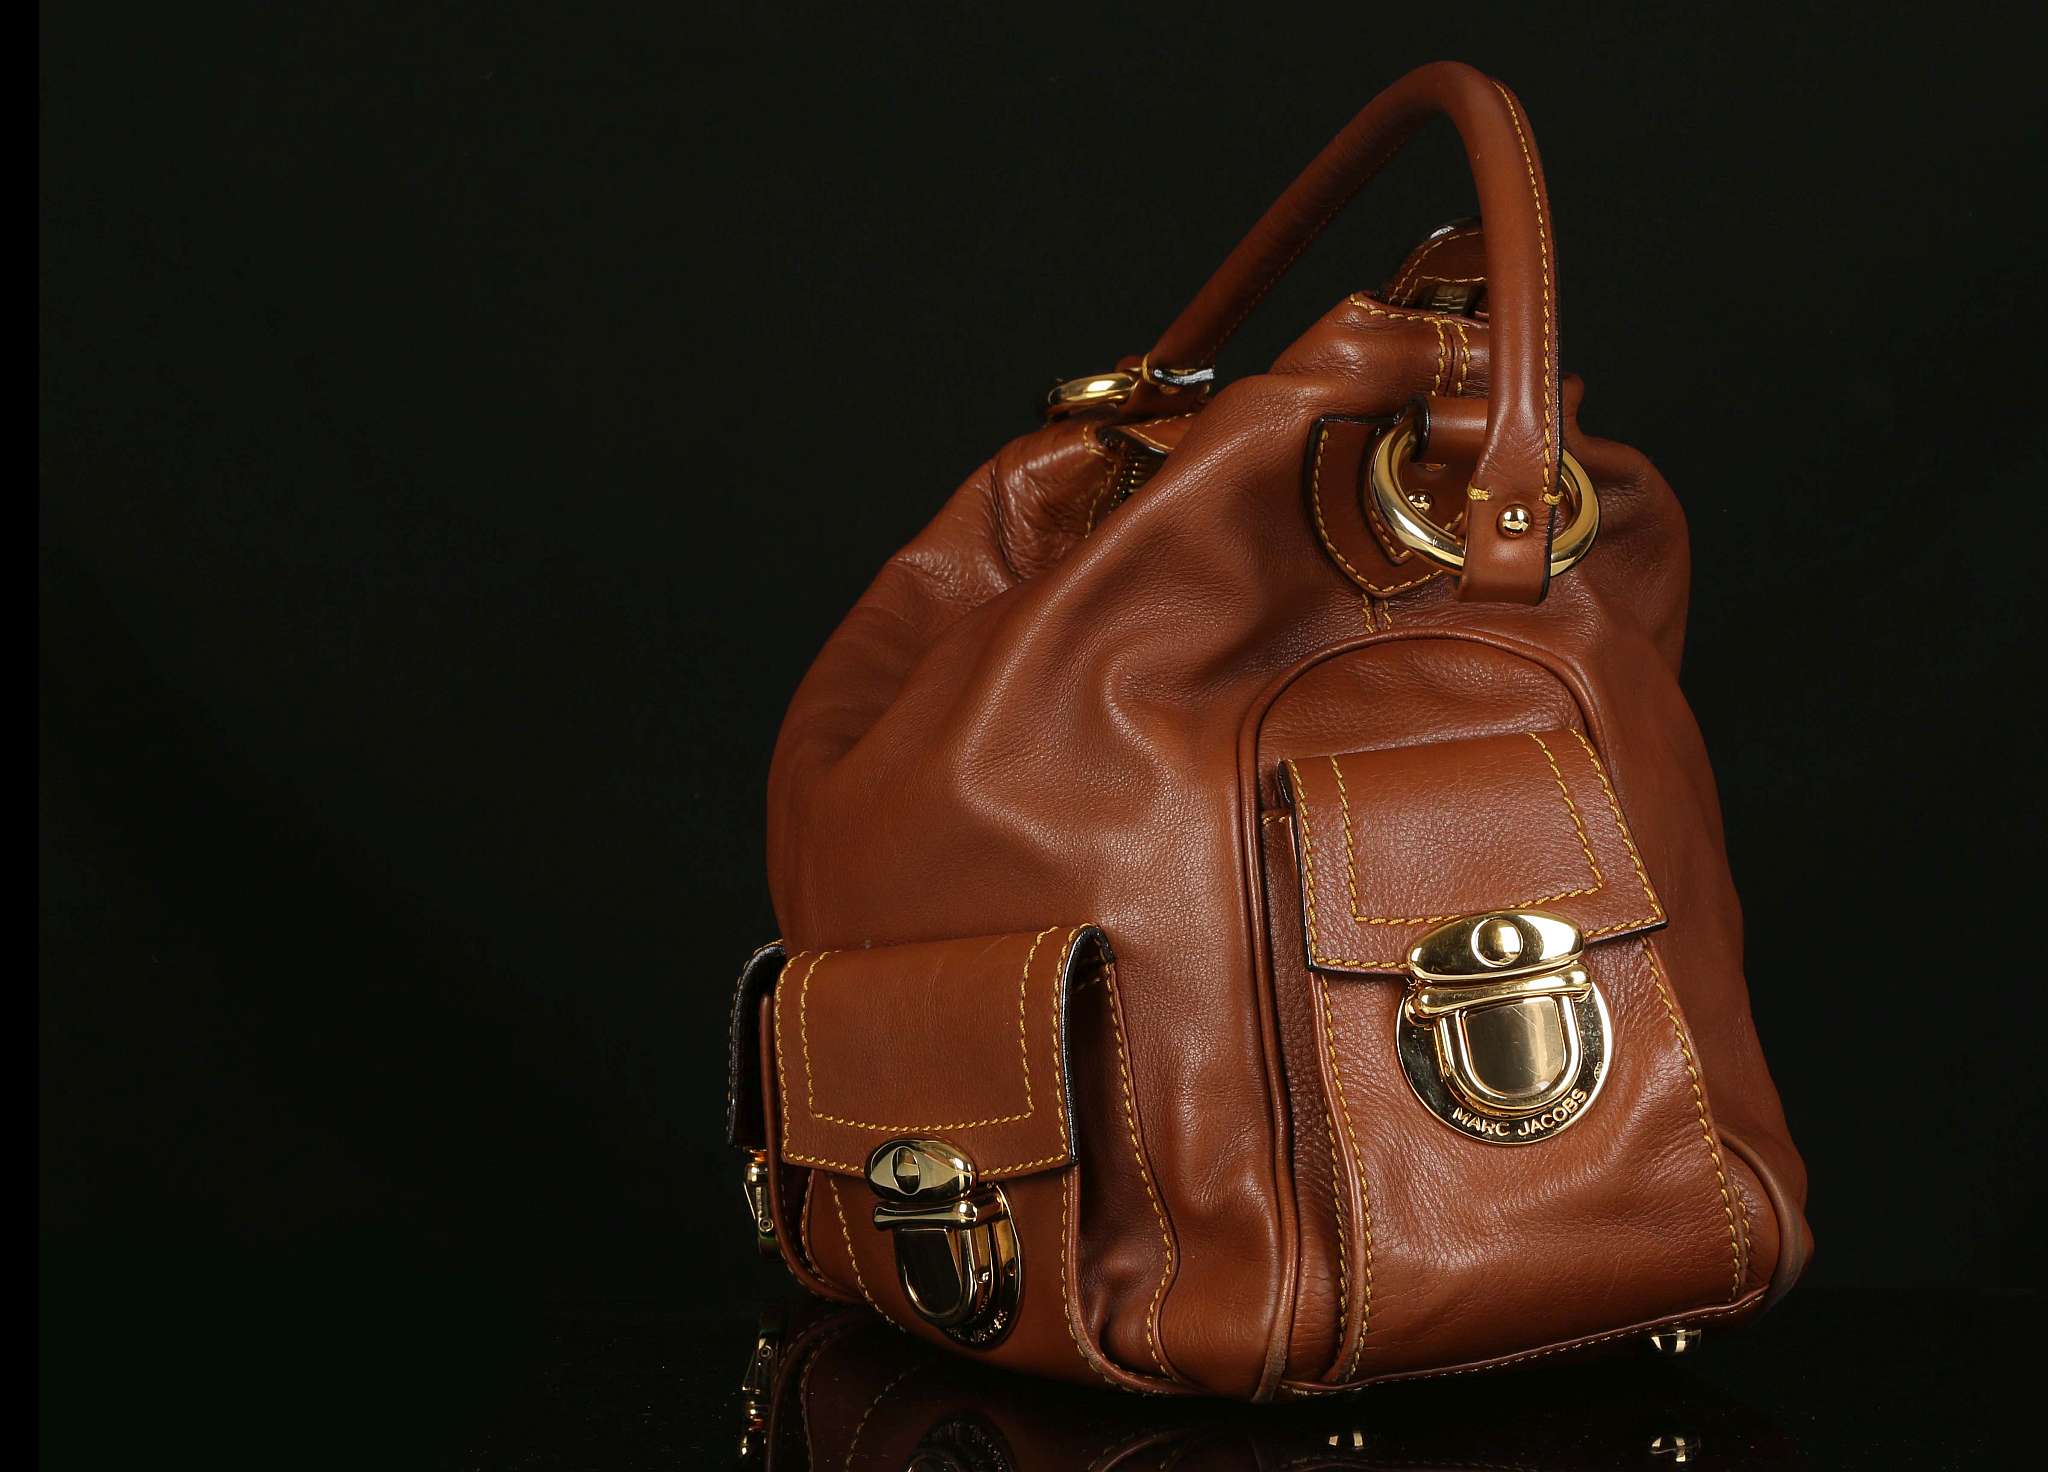 MARC JACOBS BLAKE HOBO BAG, soft brown leather with contrasting stitching, gilt tone hardware, - Image 2 of 6